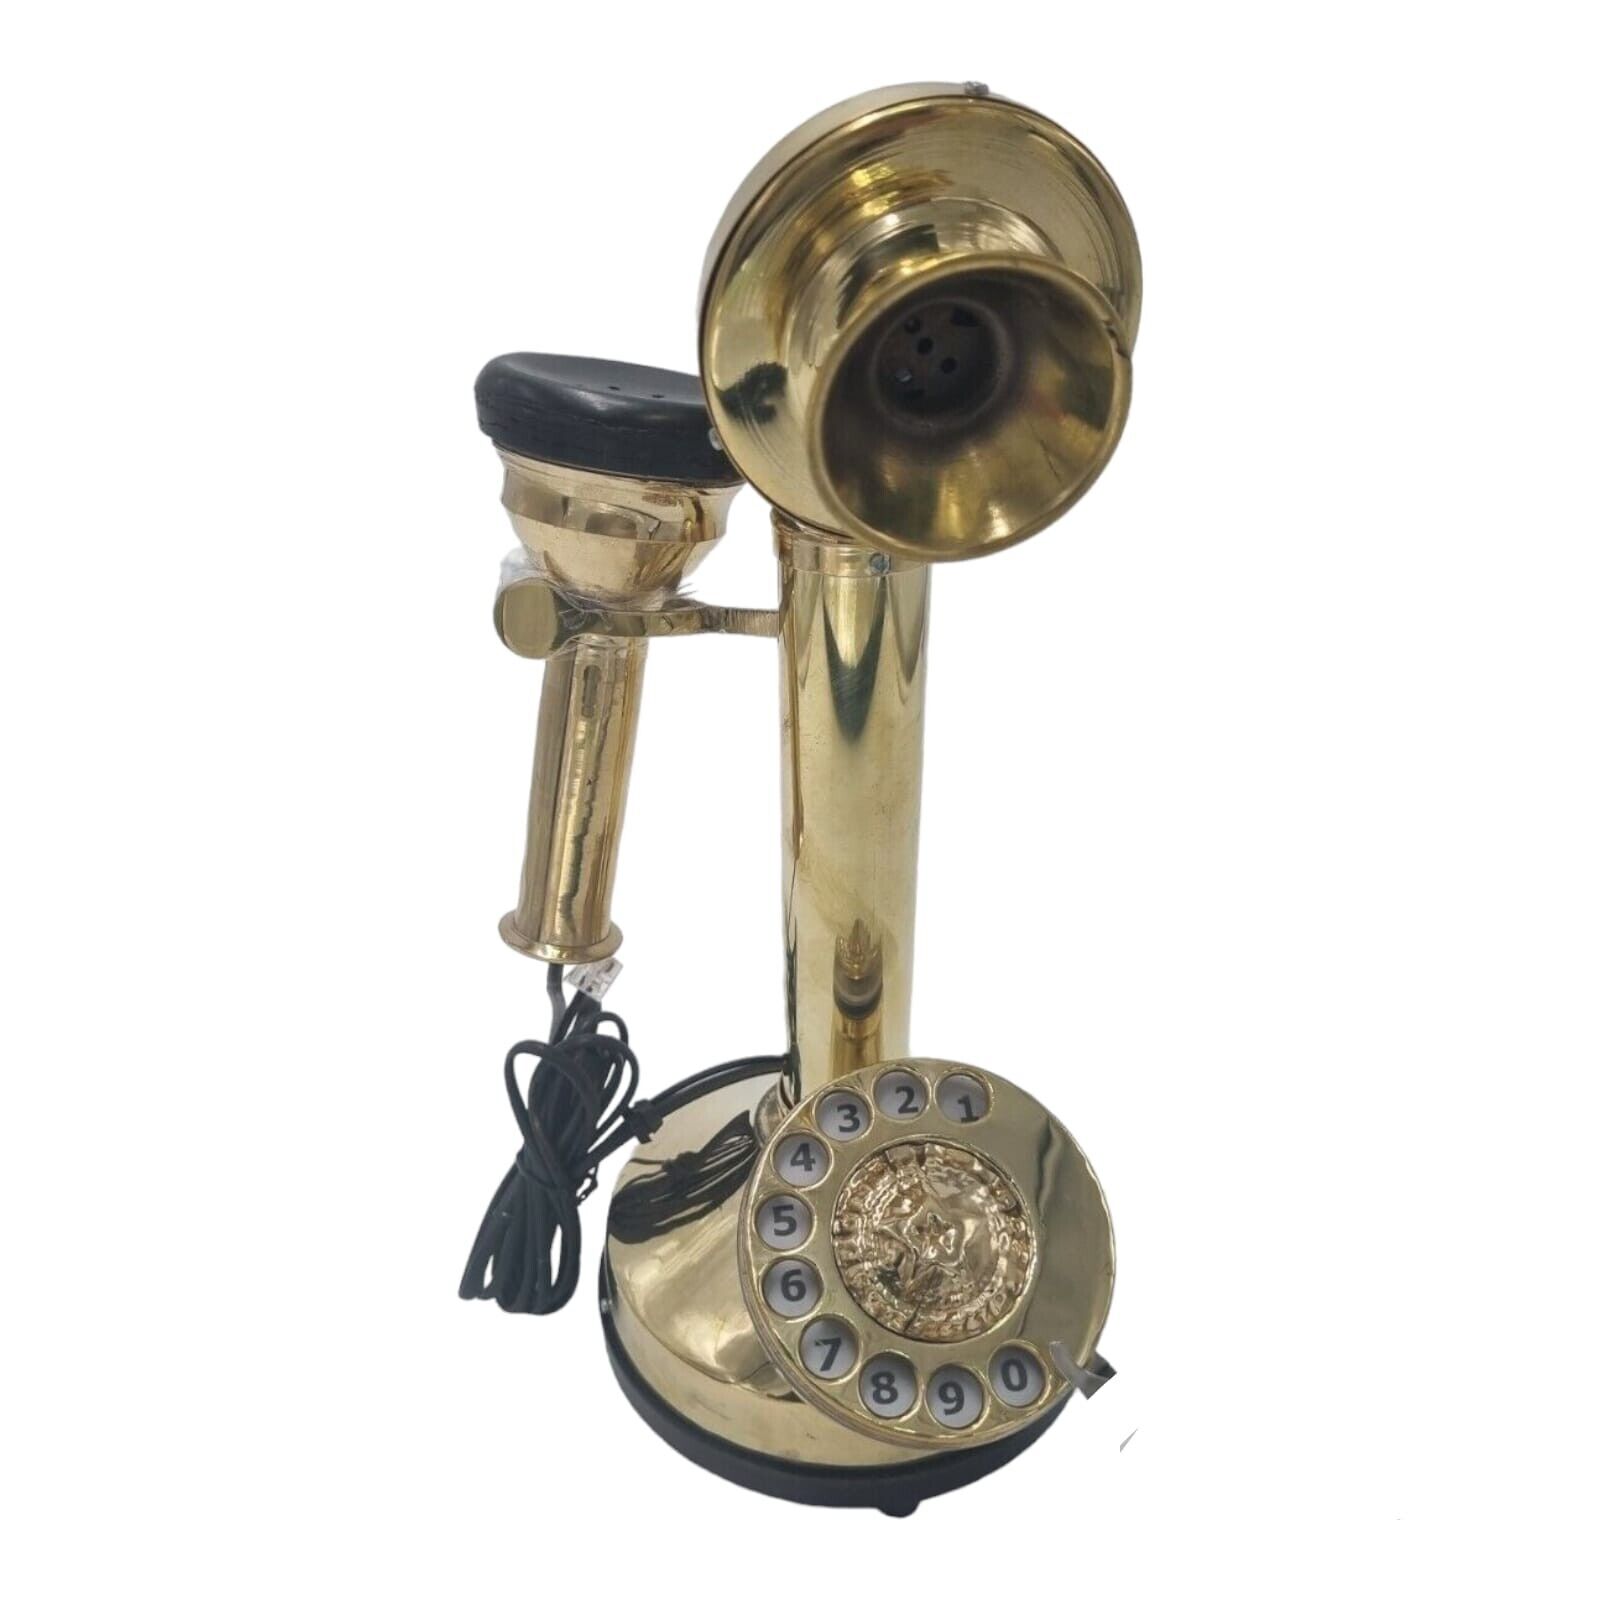 Brass Candlestick Vintage Phone Rotary Dial Antique Station Telephone Home Decor